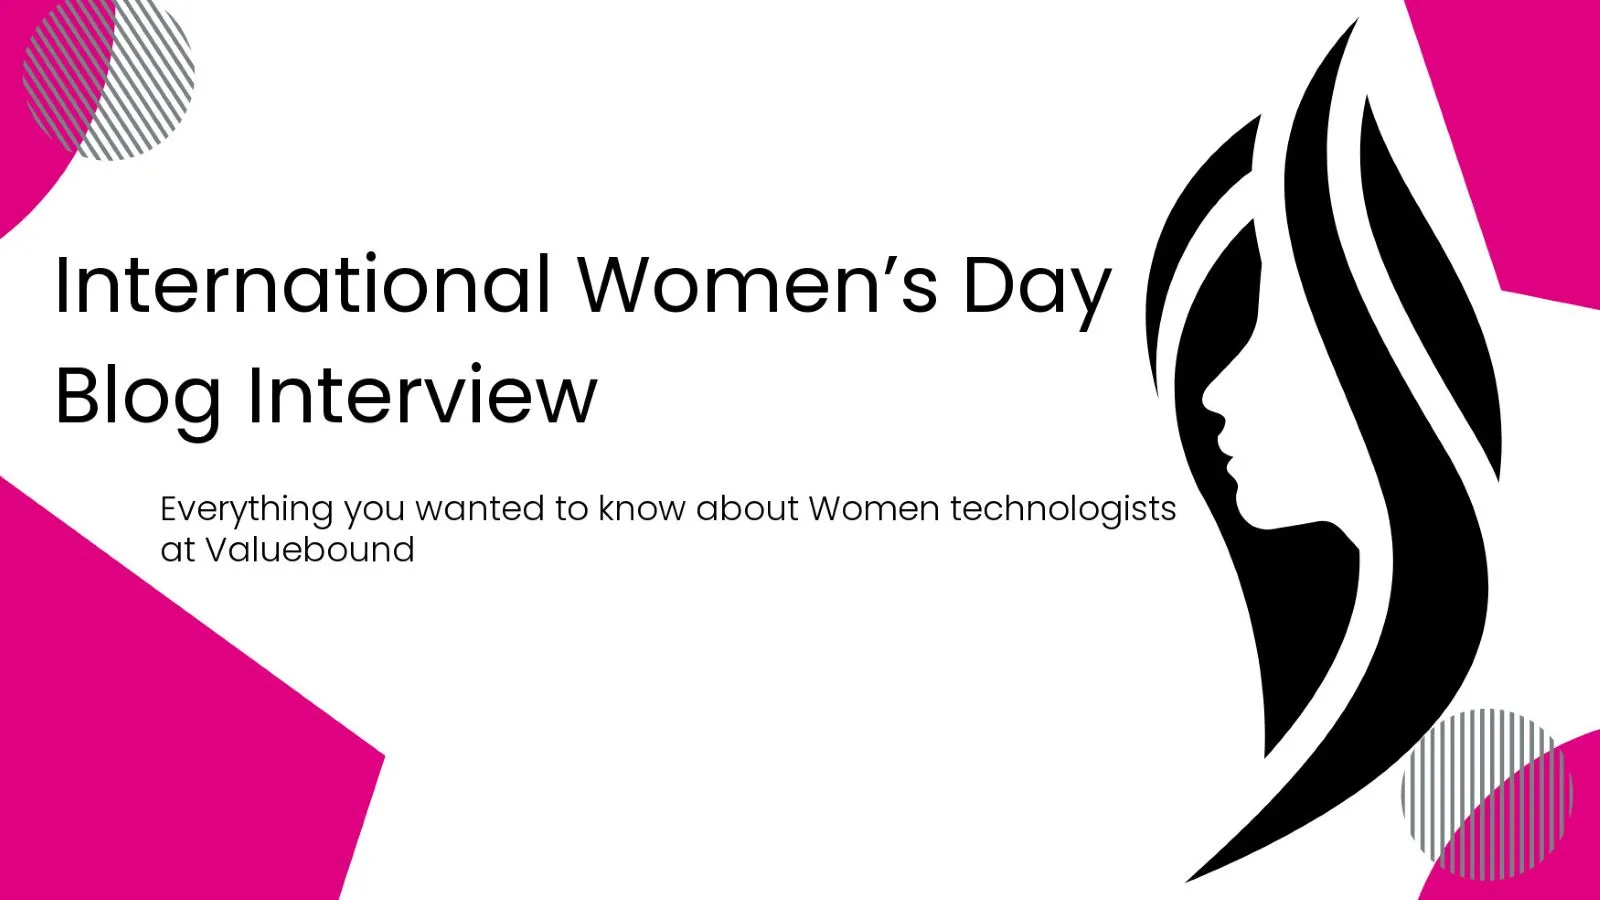 Everything you wanted to know about Women technologists at Valuebound